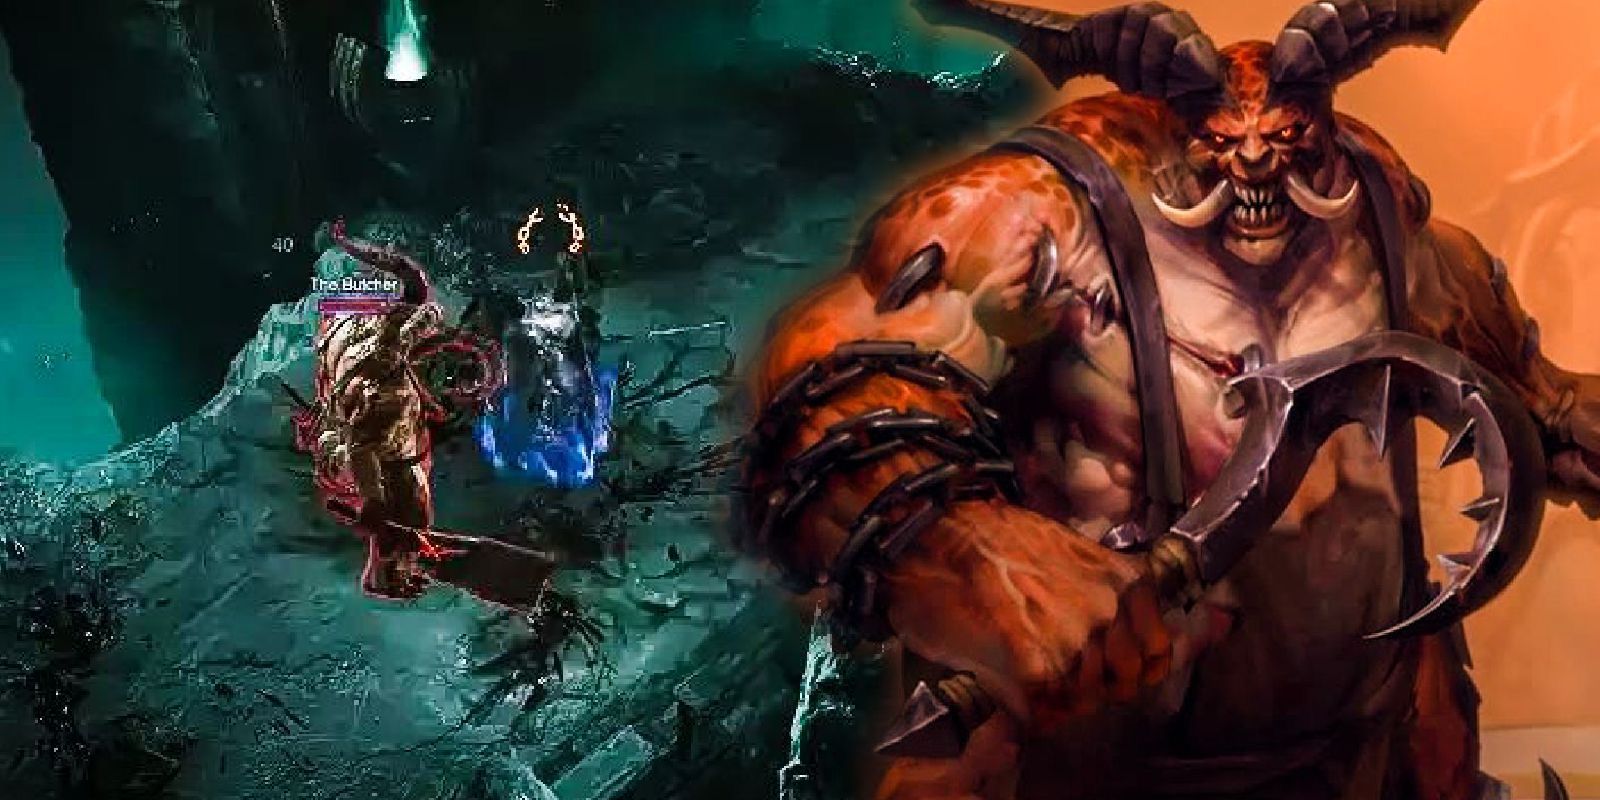 How to survive your encounter with The Butcher in Diablo 4